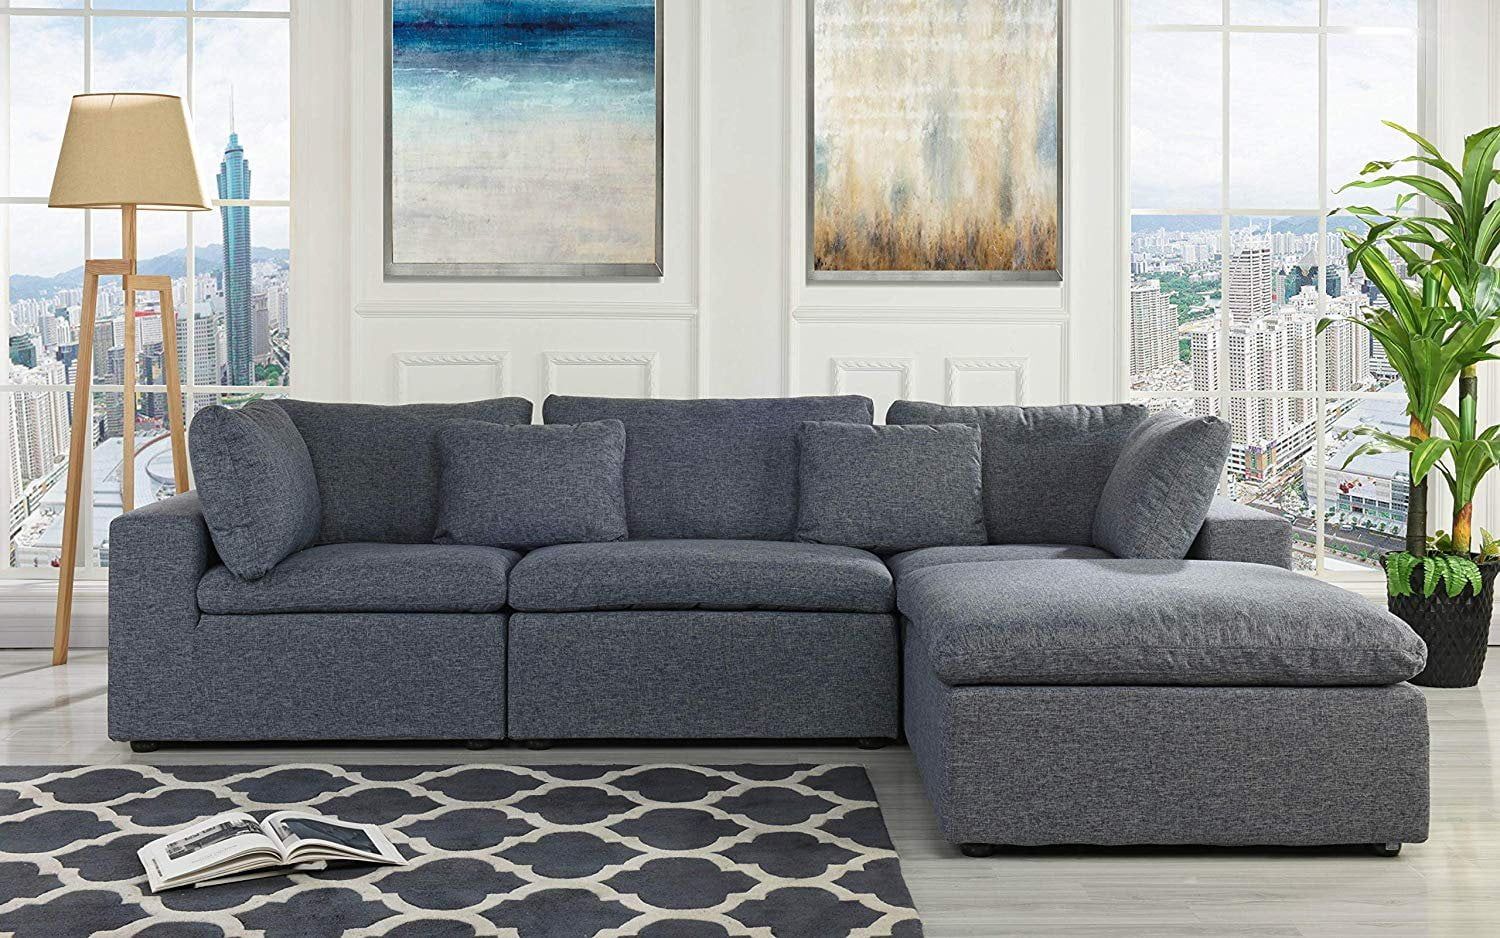 Classic Large Linen Fabric Sectional Sofa, L Shape Couch With Wide For Gray Linen Sofas (View 3 of 20)